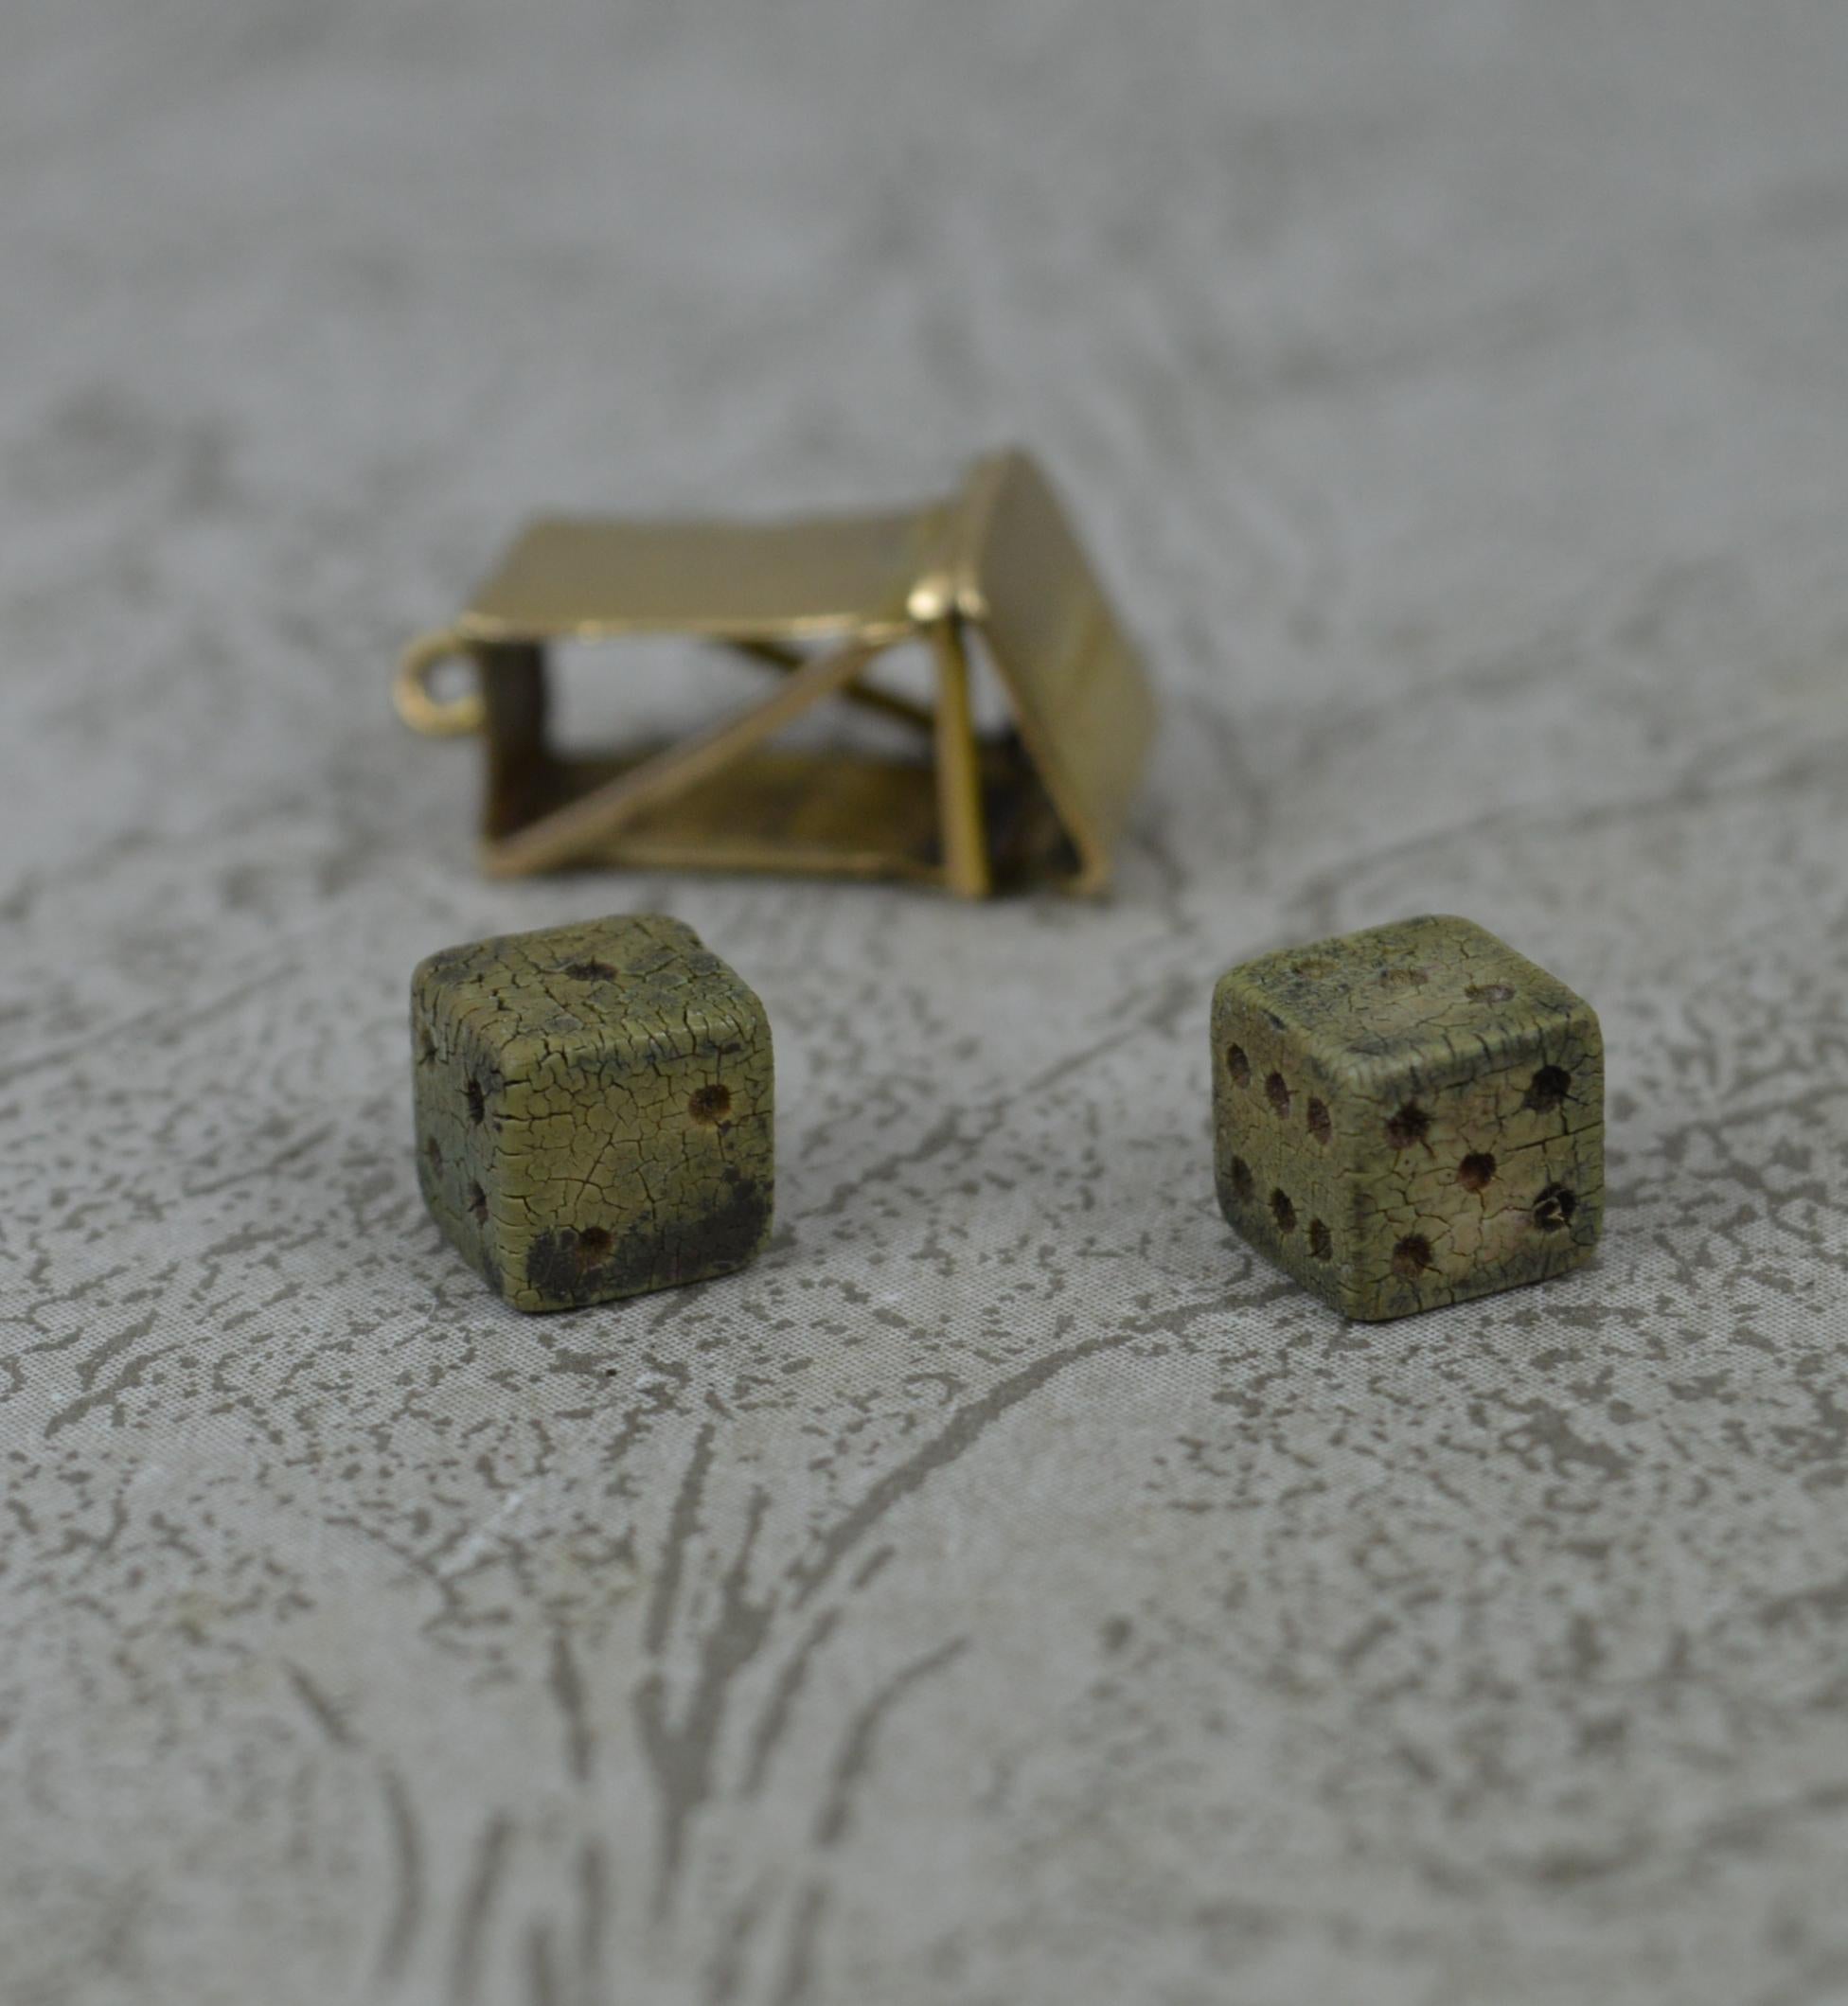 Super Rare Miniature Dice Holder and 9ct Gold Box Pendant Charm In Good Condition For Sale In St Helens, GB